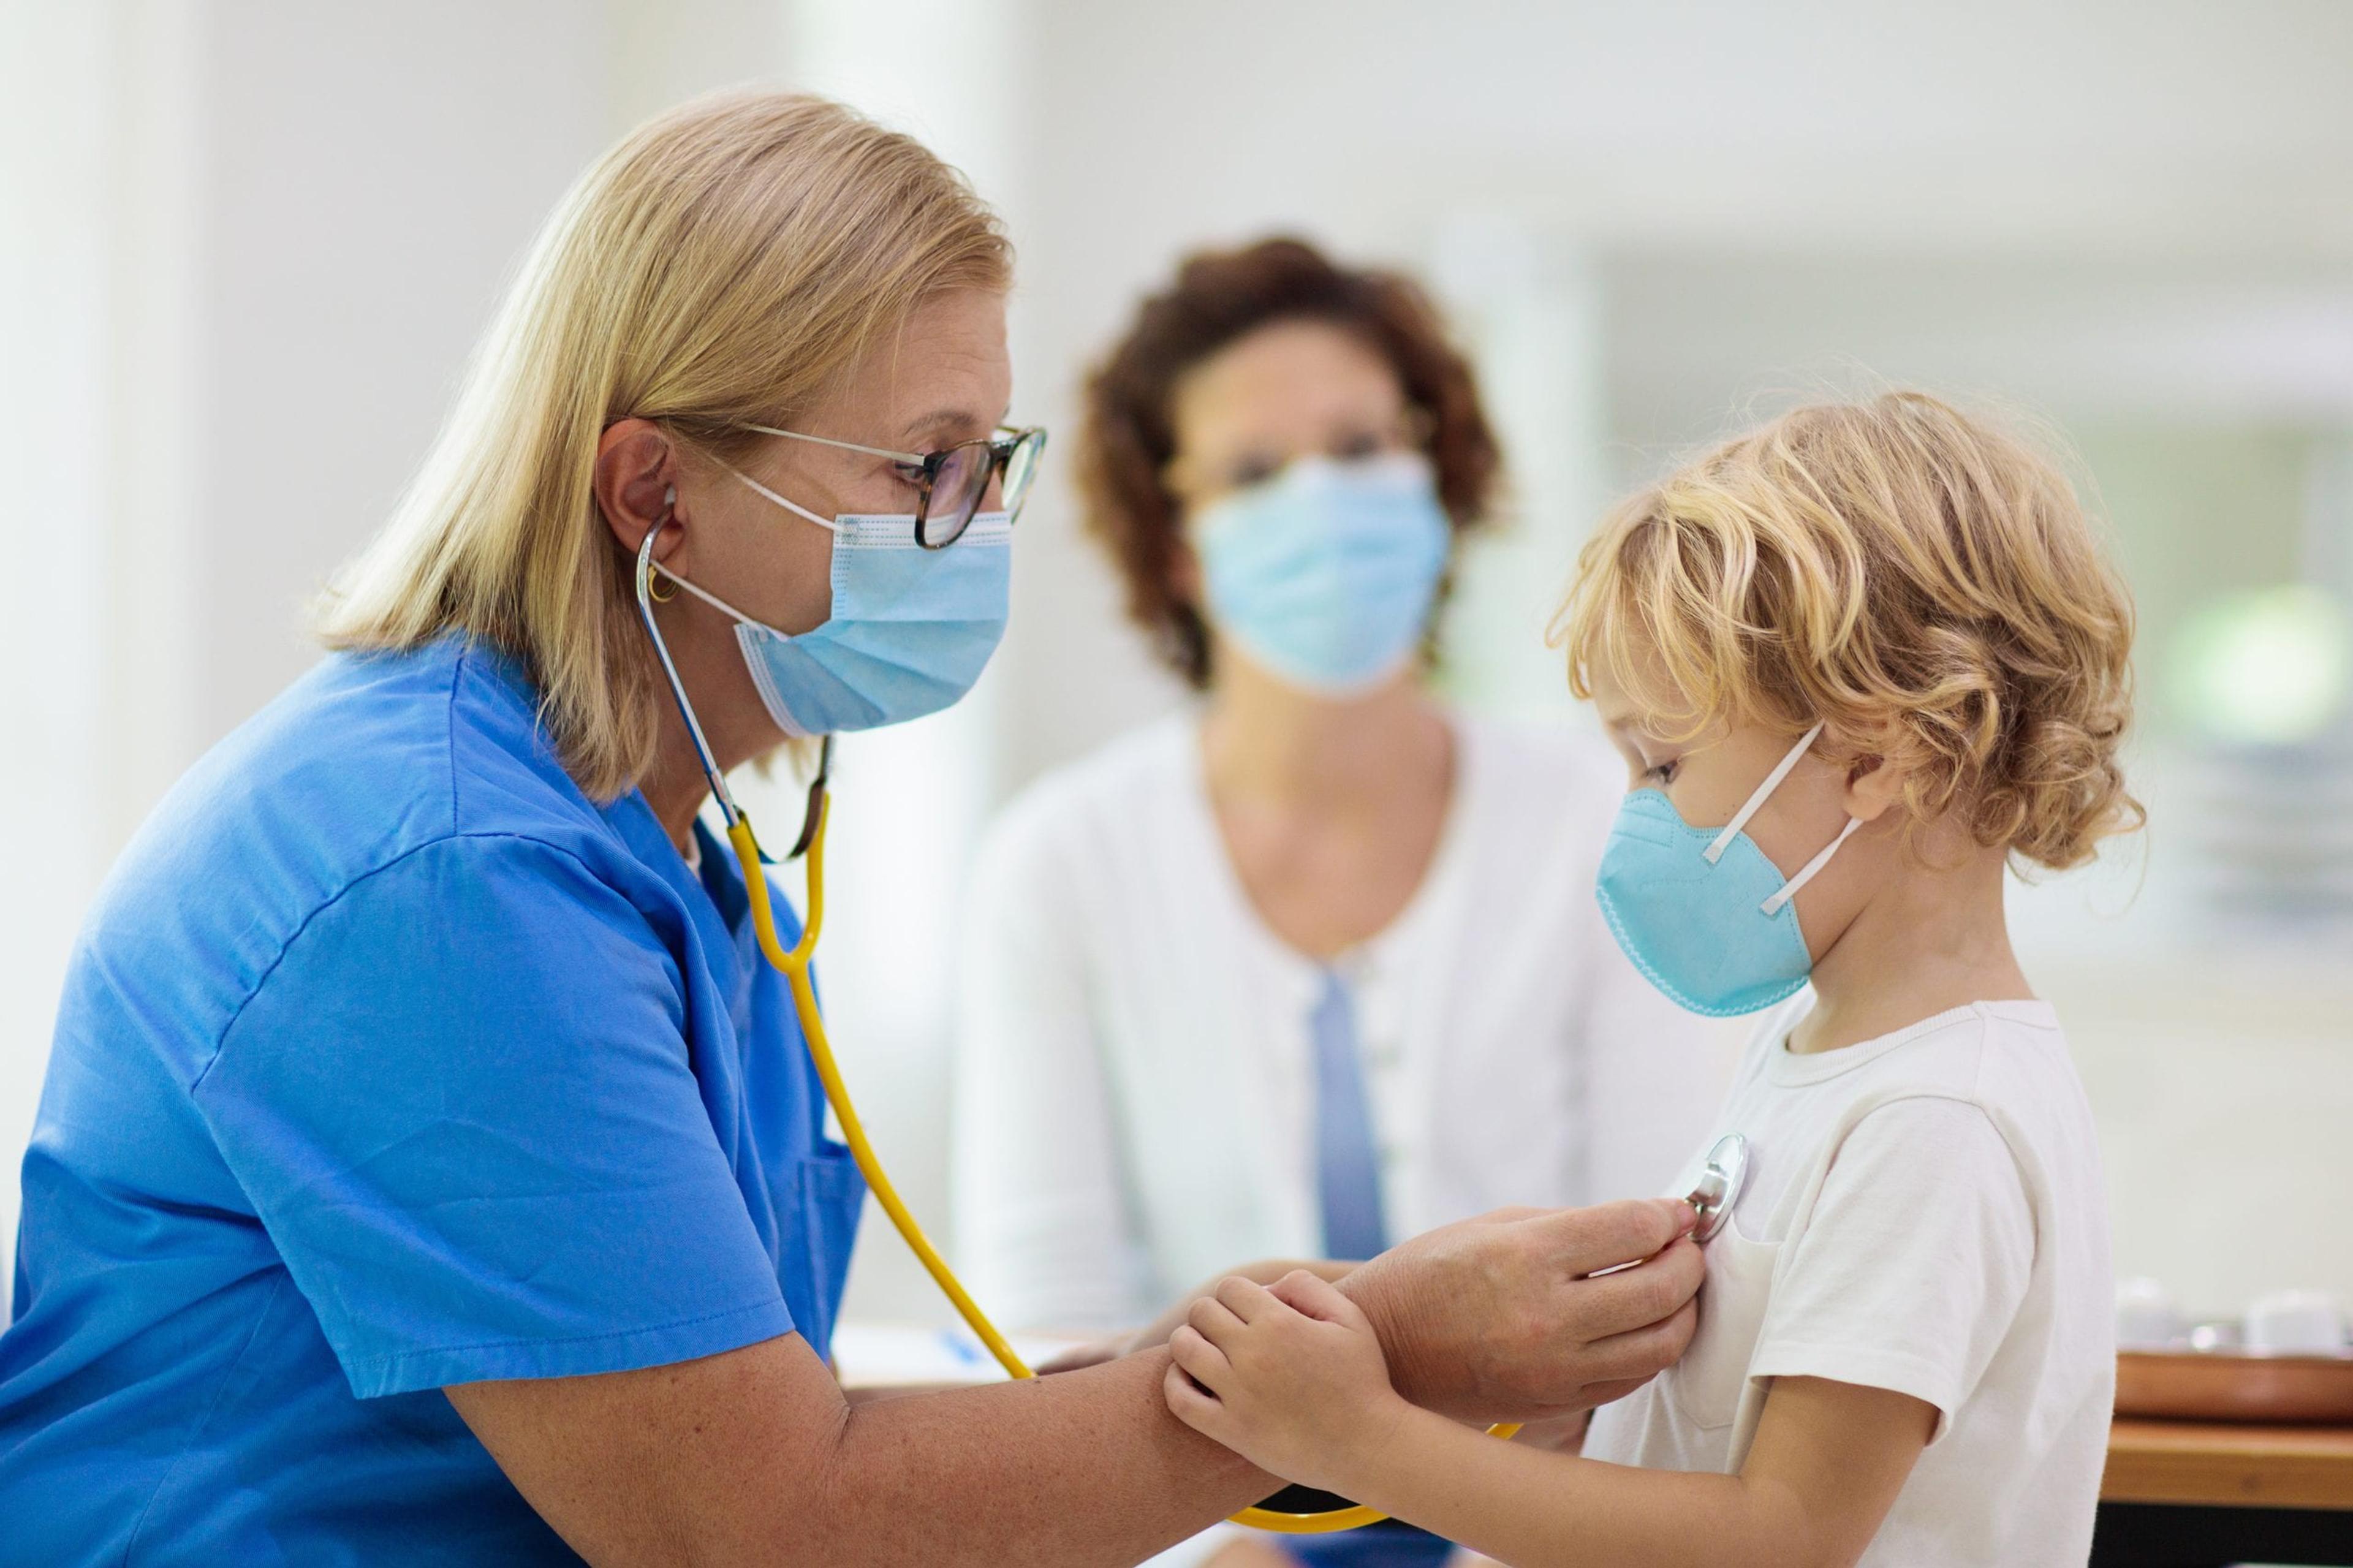 Doctor examining a small child. Both are wearing masks.